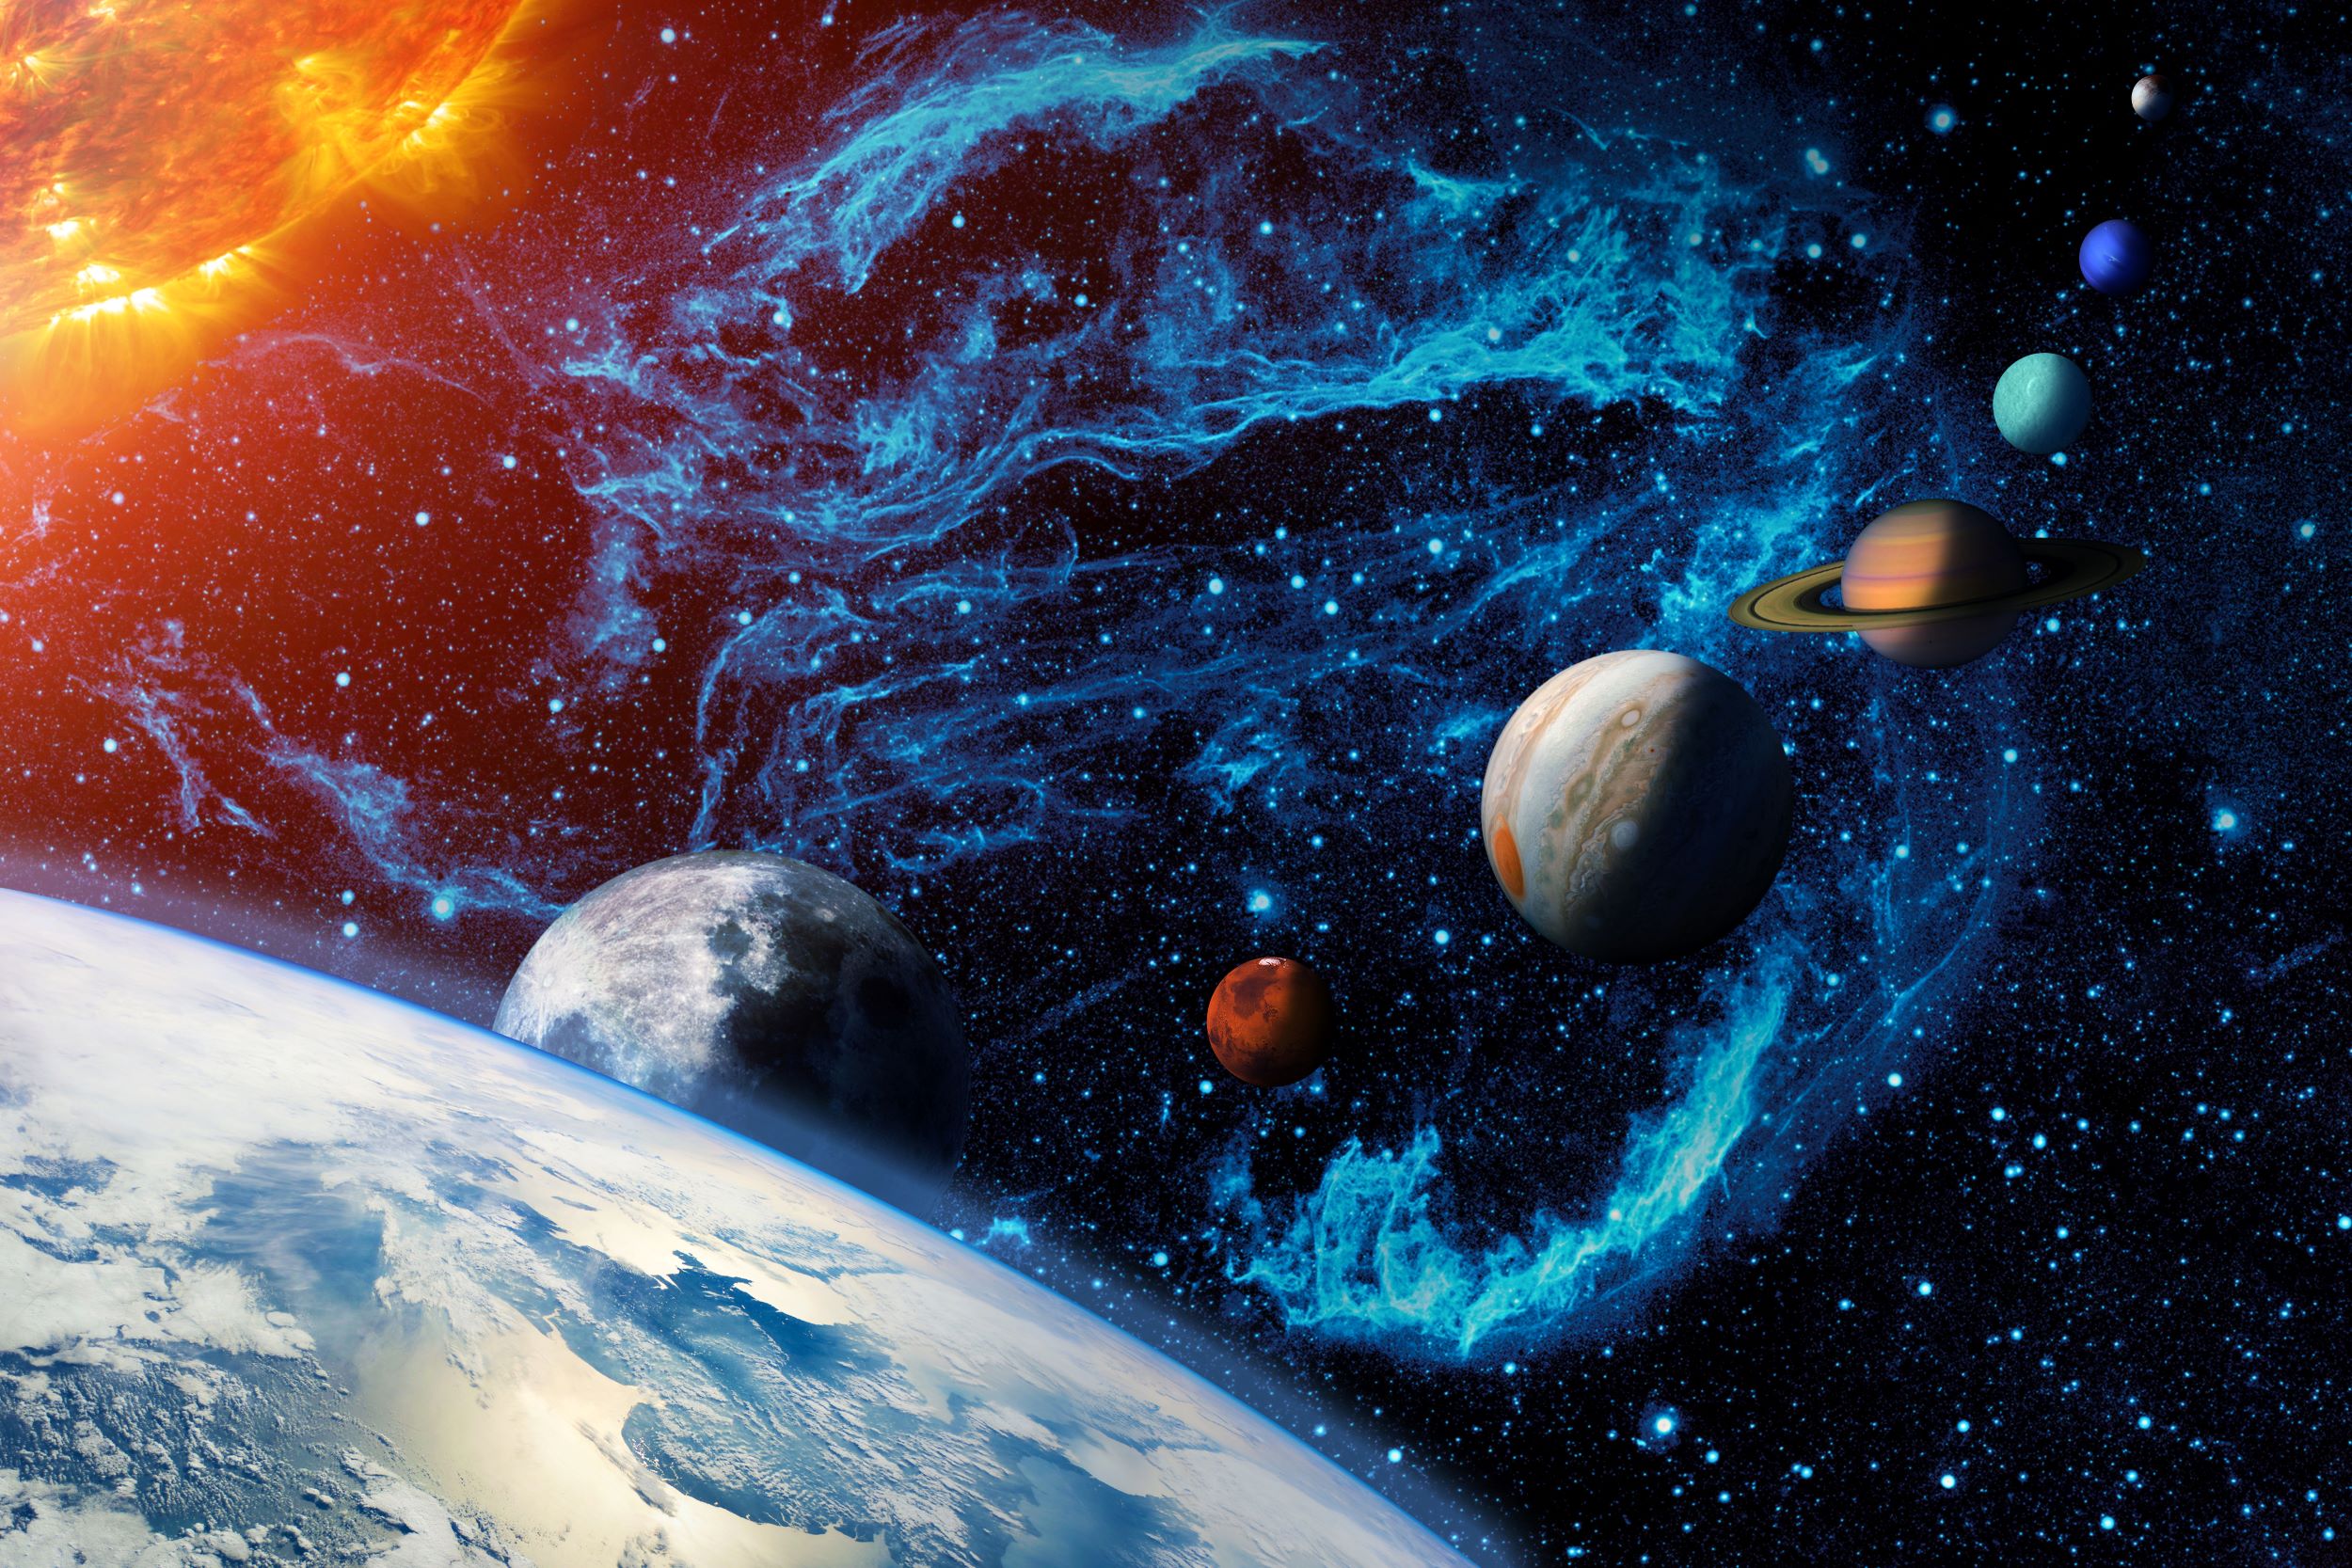 digital illustration of the solar system with Earth in the foreground and the sun in the upper left.